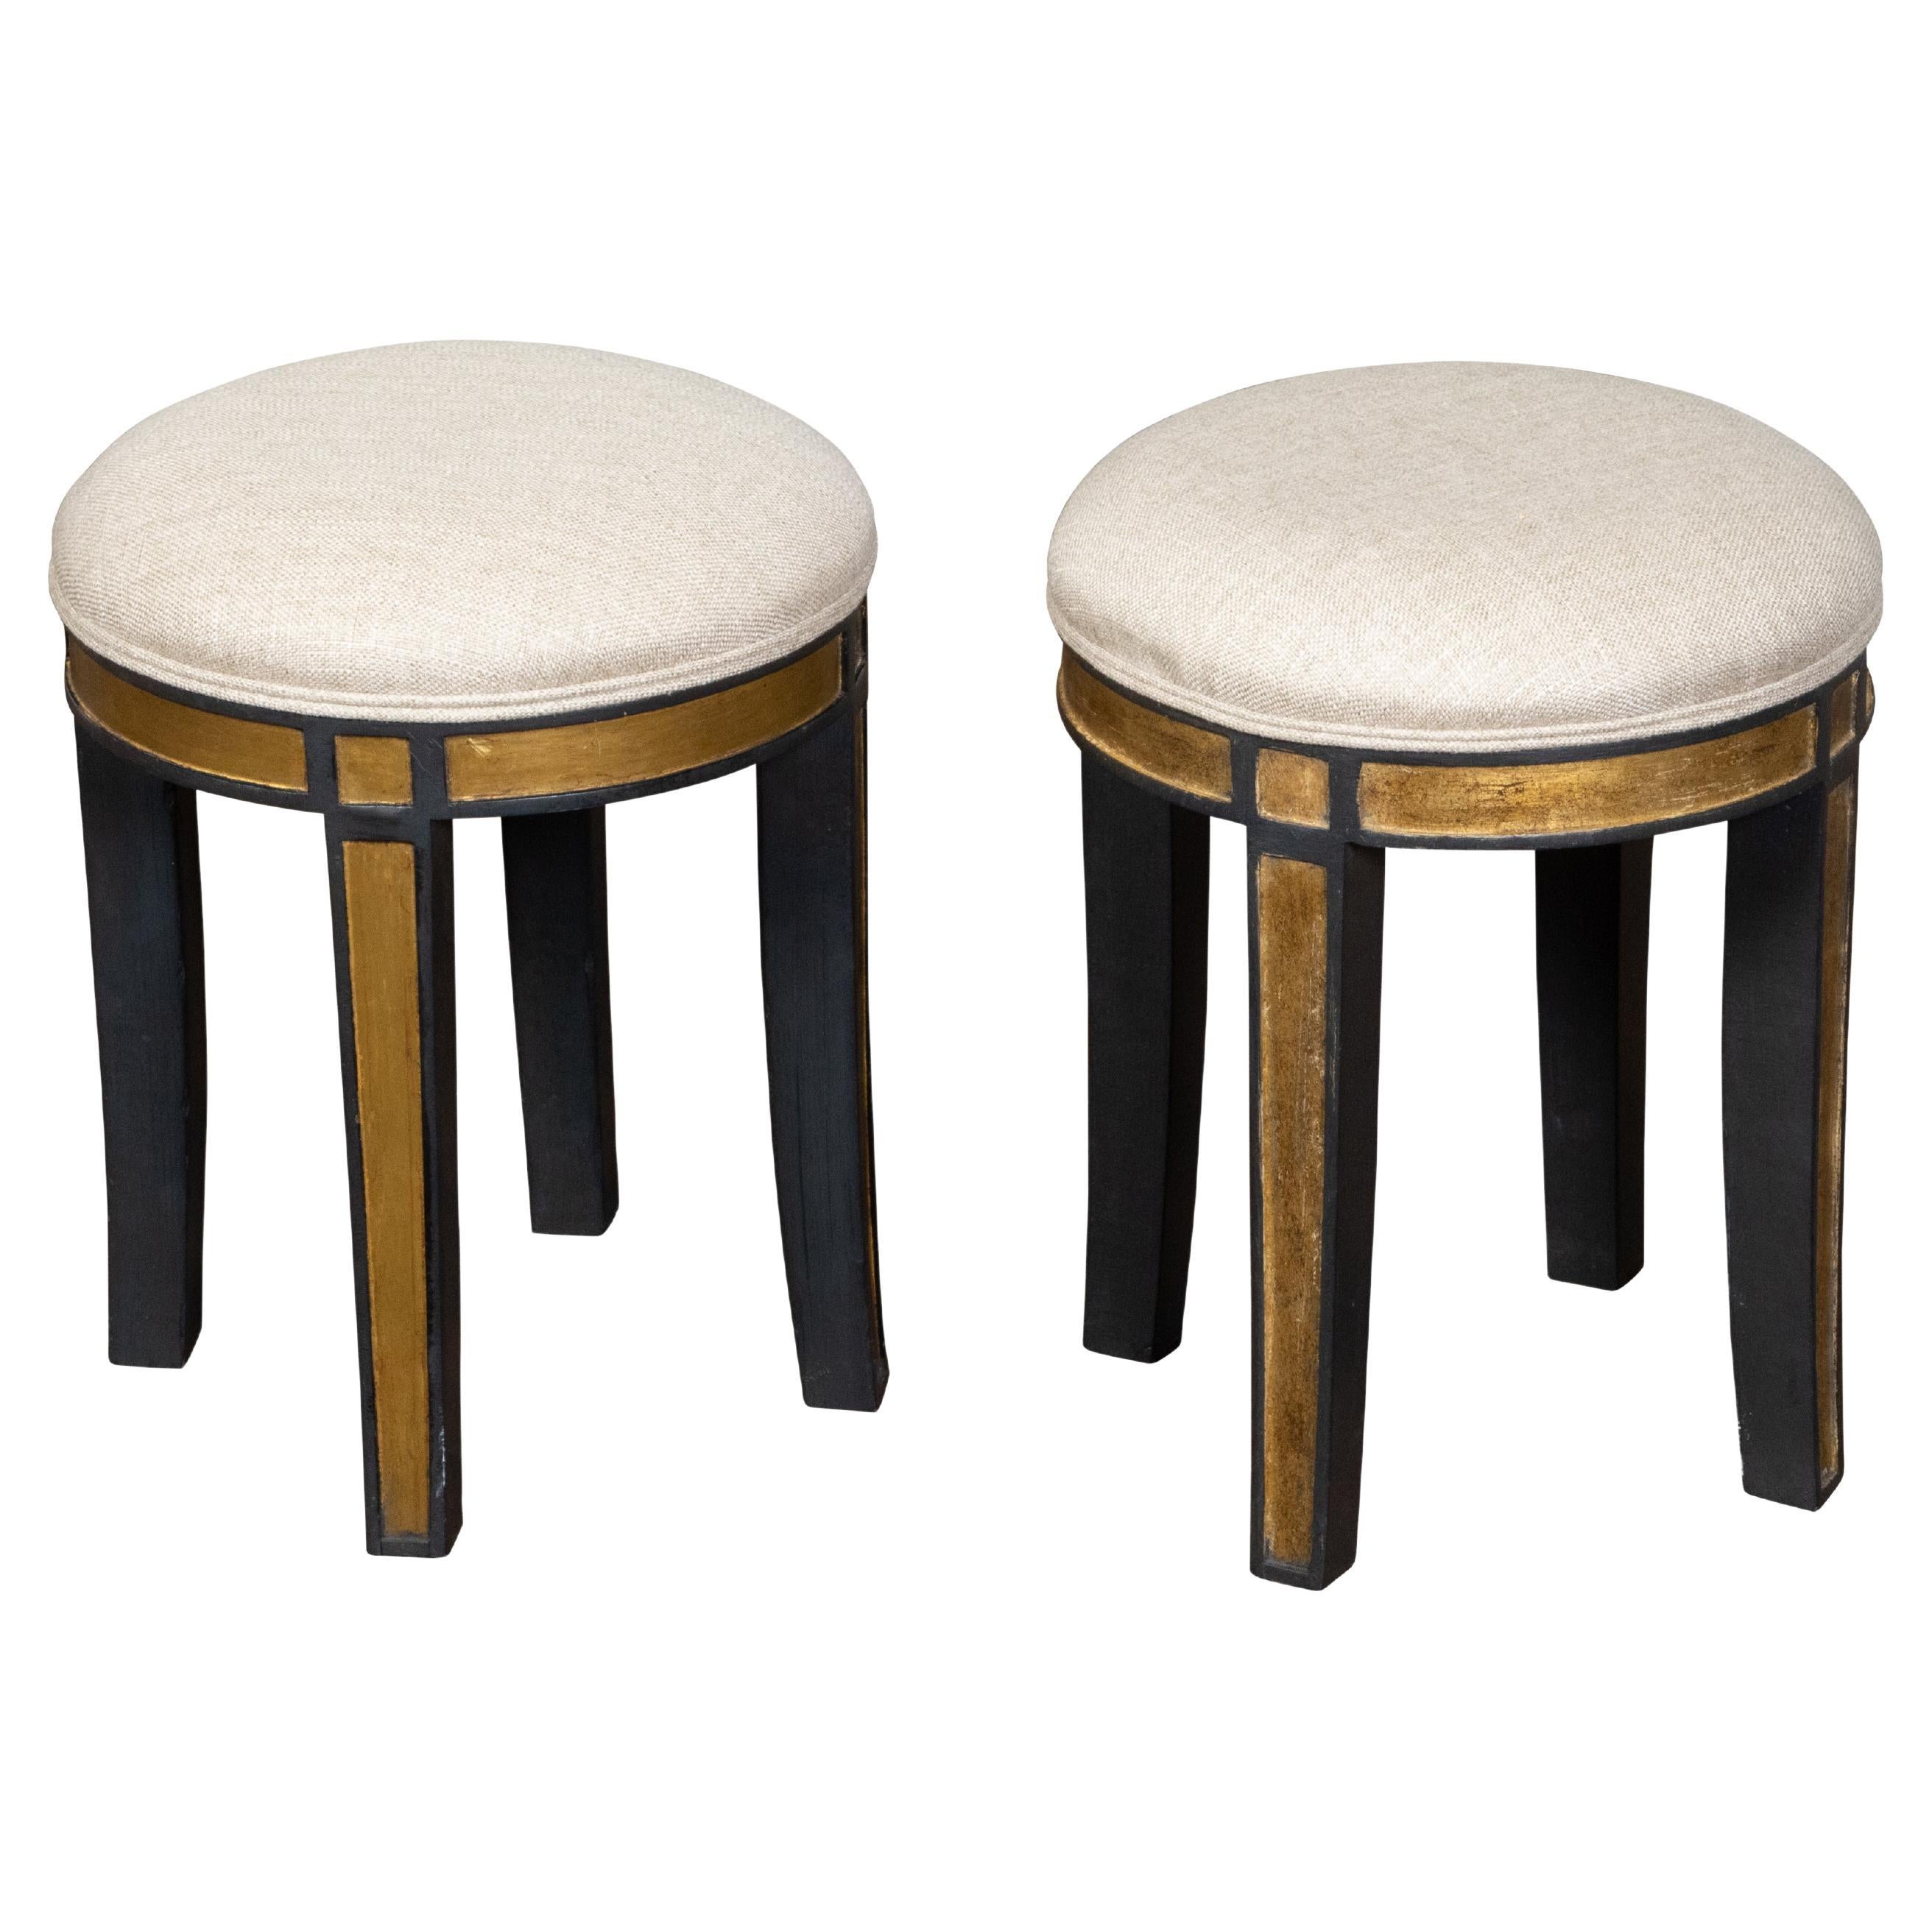 Pair of Midcentury Italian Upholstered Stools with Black and Gold Décor